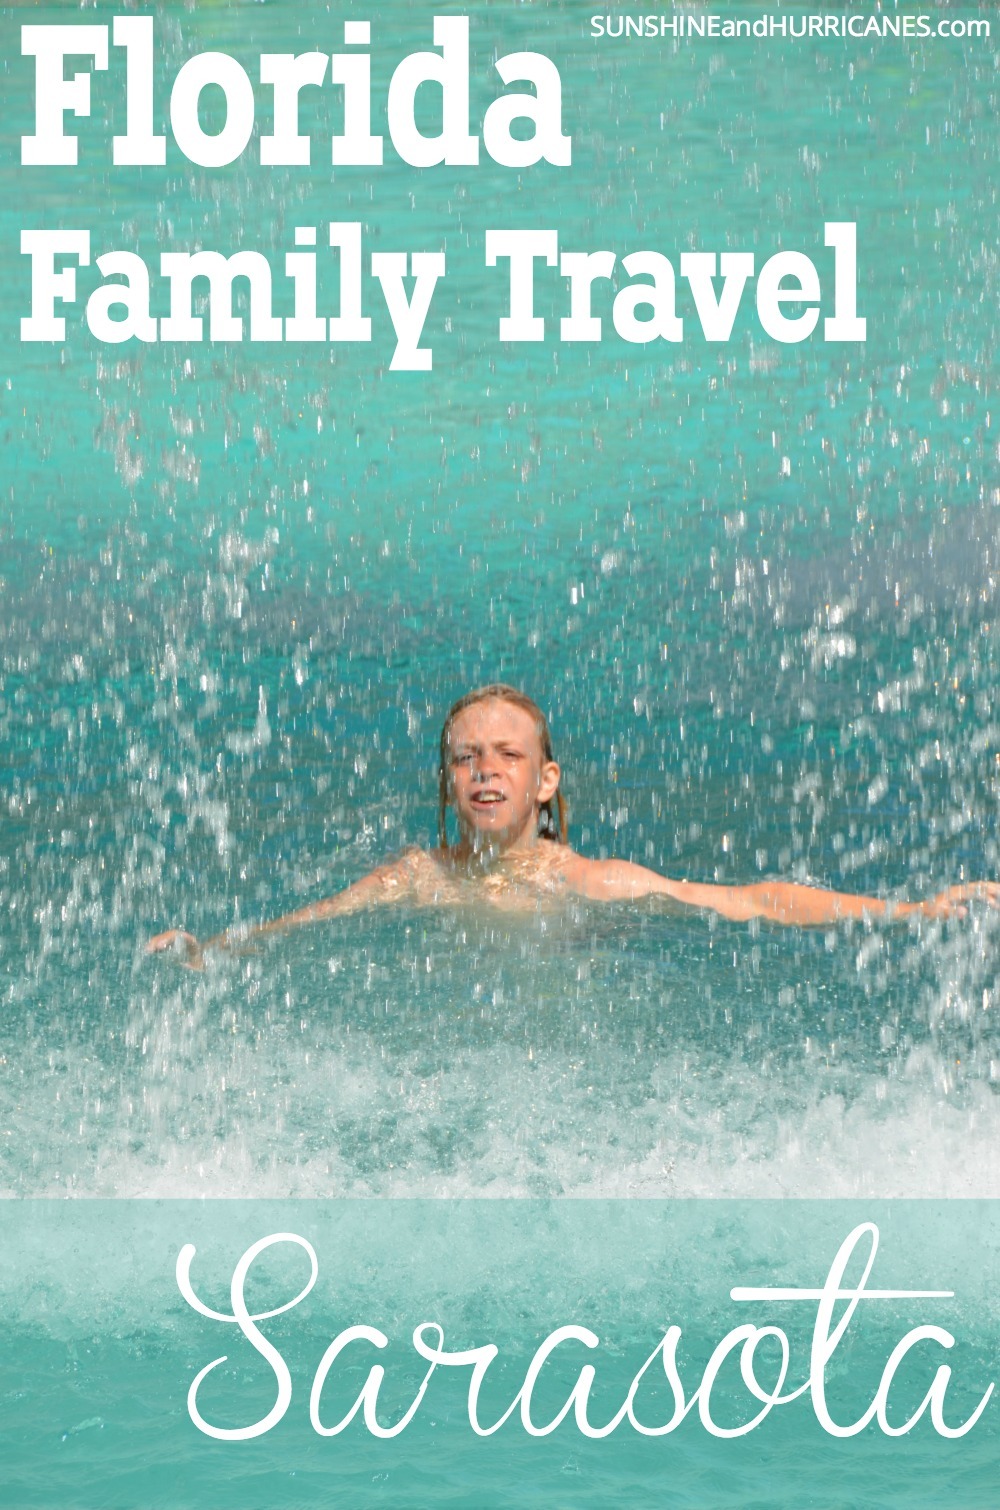 Looking for a fun Florida family getaway? Whether you live in Florida and want a great staycation or if you are traveling to Florida for lots of fun in the sun, Sarasota is a destination not to be missed. In this post, we'll tell you where to find the award winning beaches, why you don't want to miss the Ringling Circus Museum and all the best family friendly attractions, dining option and more. Florida Family Travel Sarasota. SunshineandHurricanes.com